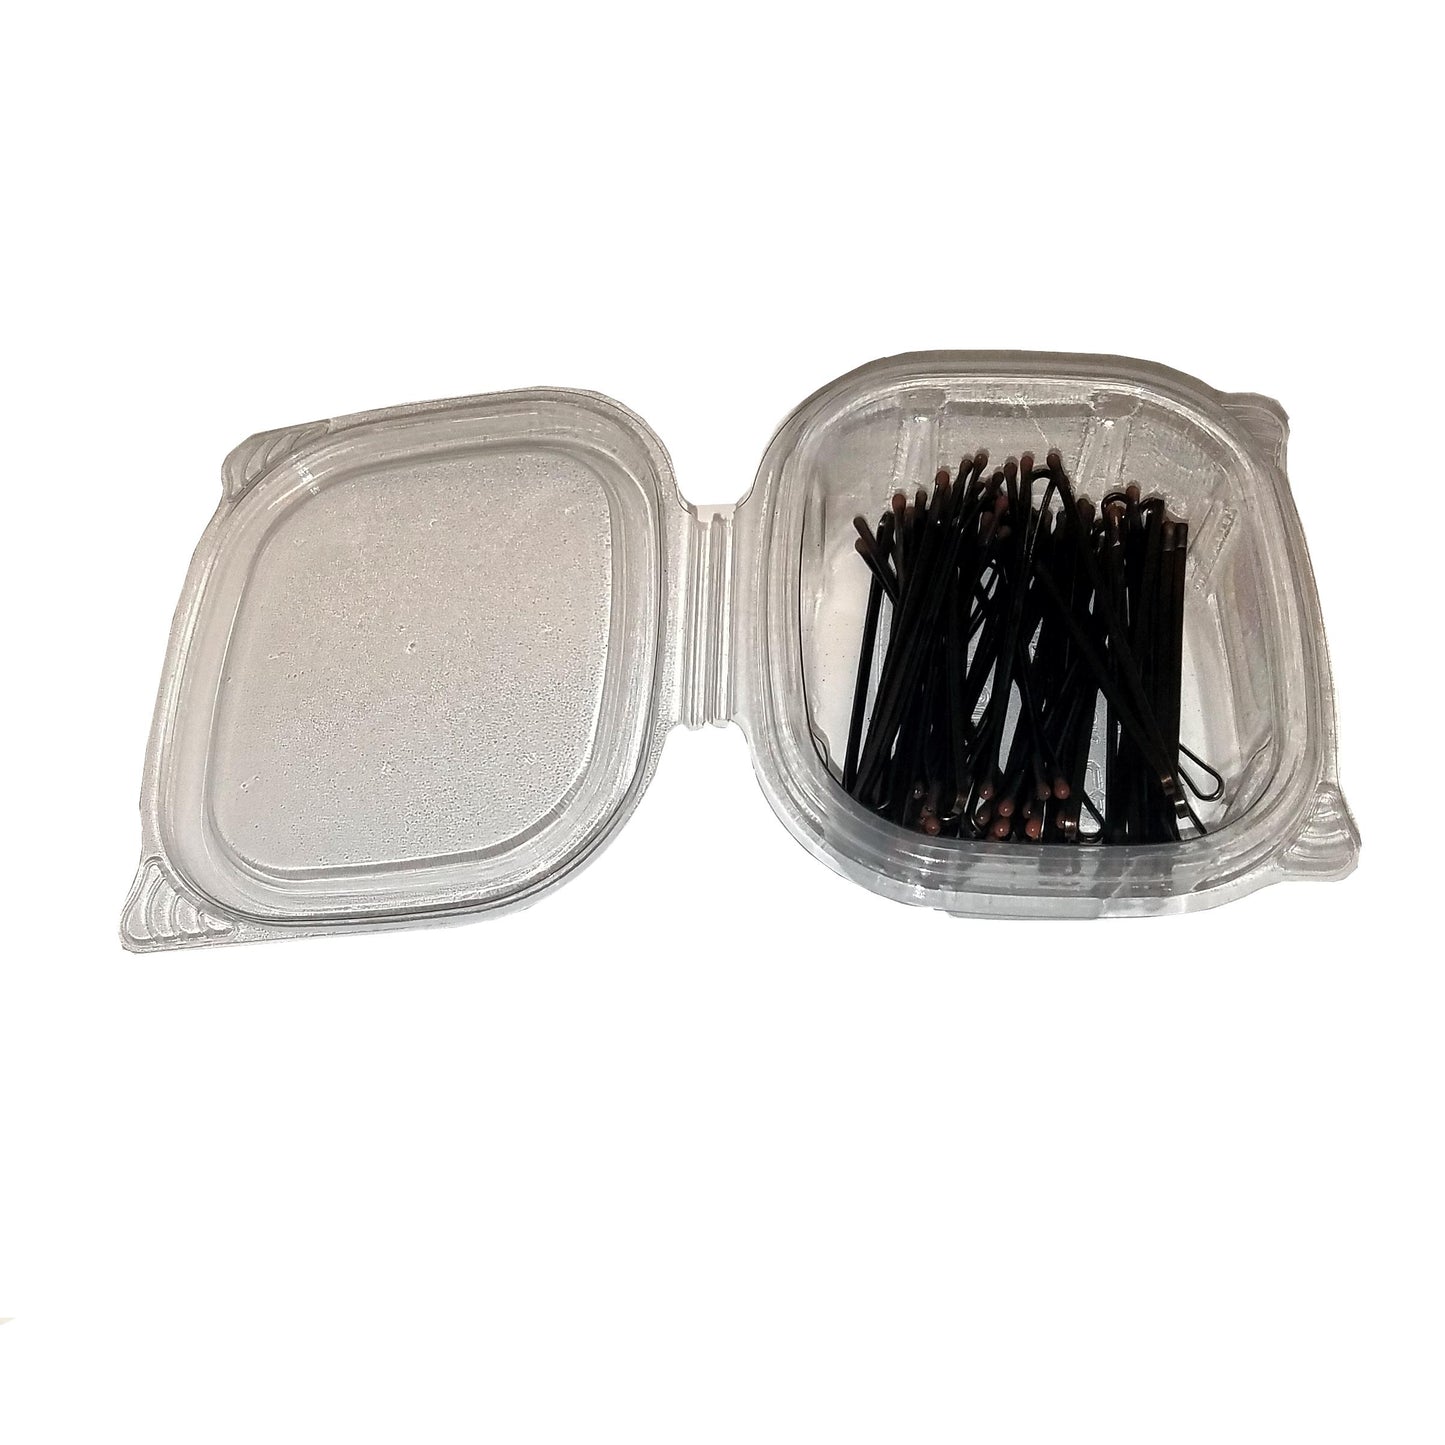 36, Brown, US Made, Jumbo Bobby Pins in a Tub